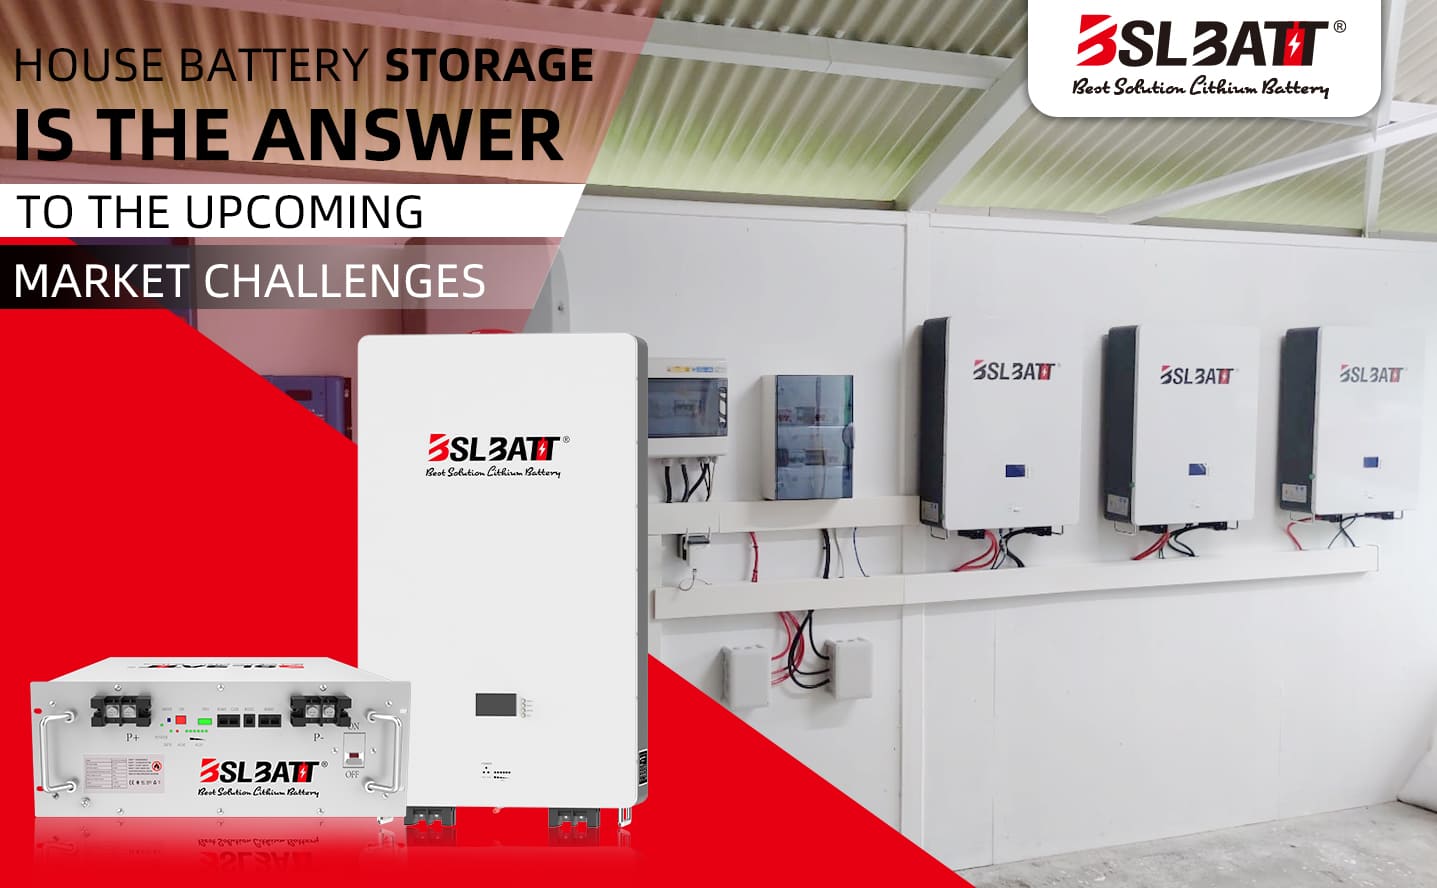 House Battery Storage is The Answer to The Upcoming Market Challenges